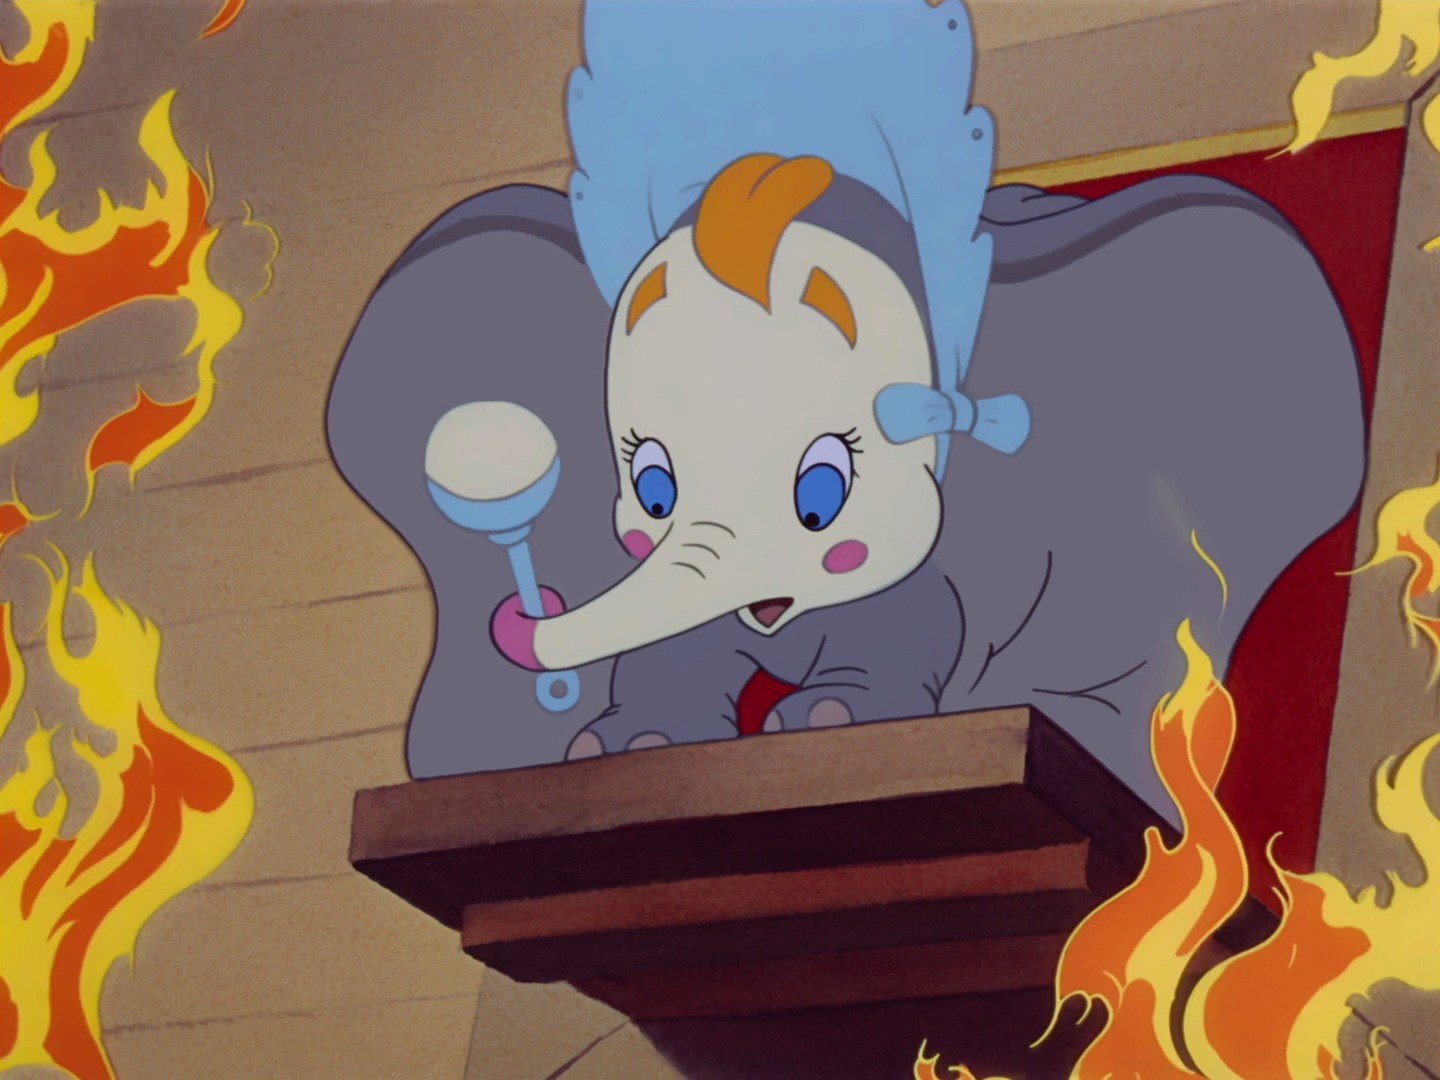 Dumbo, who&#x27;s dressed like a baby, stands on a plank in the middle of flames